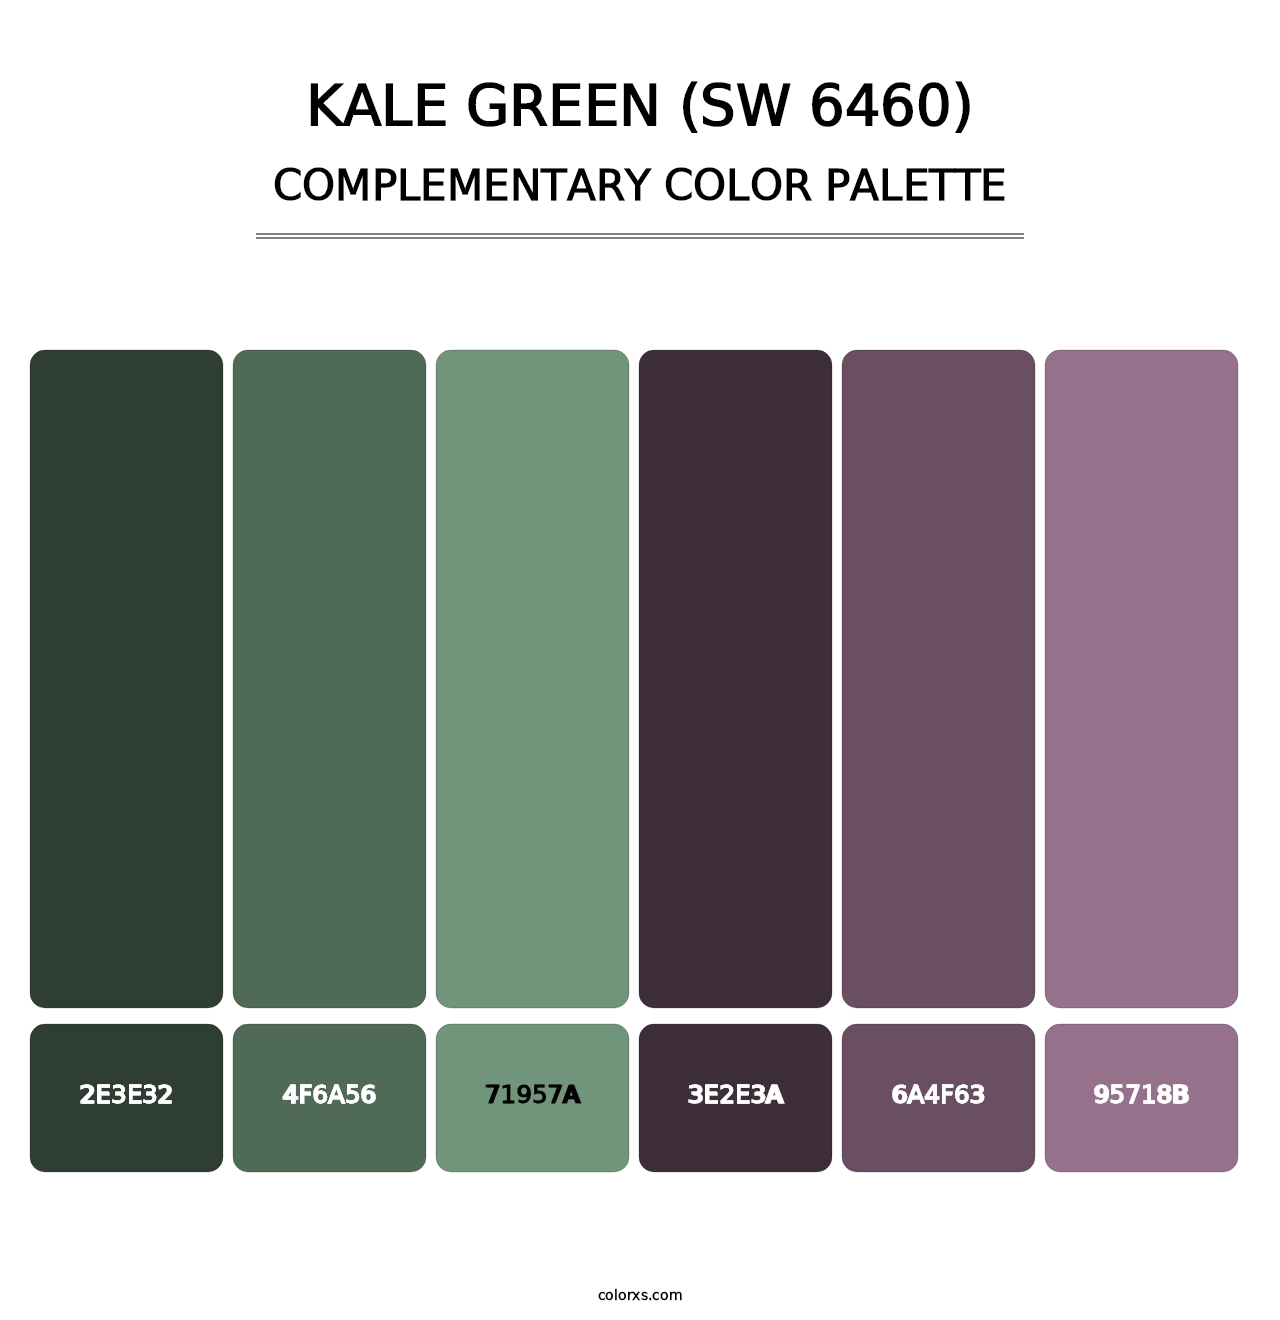 Kale Green (SW 6460) - Complementary Color Palette